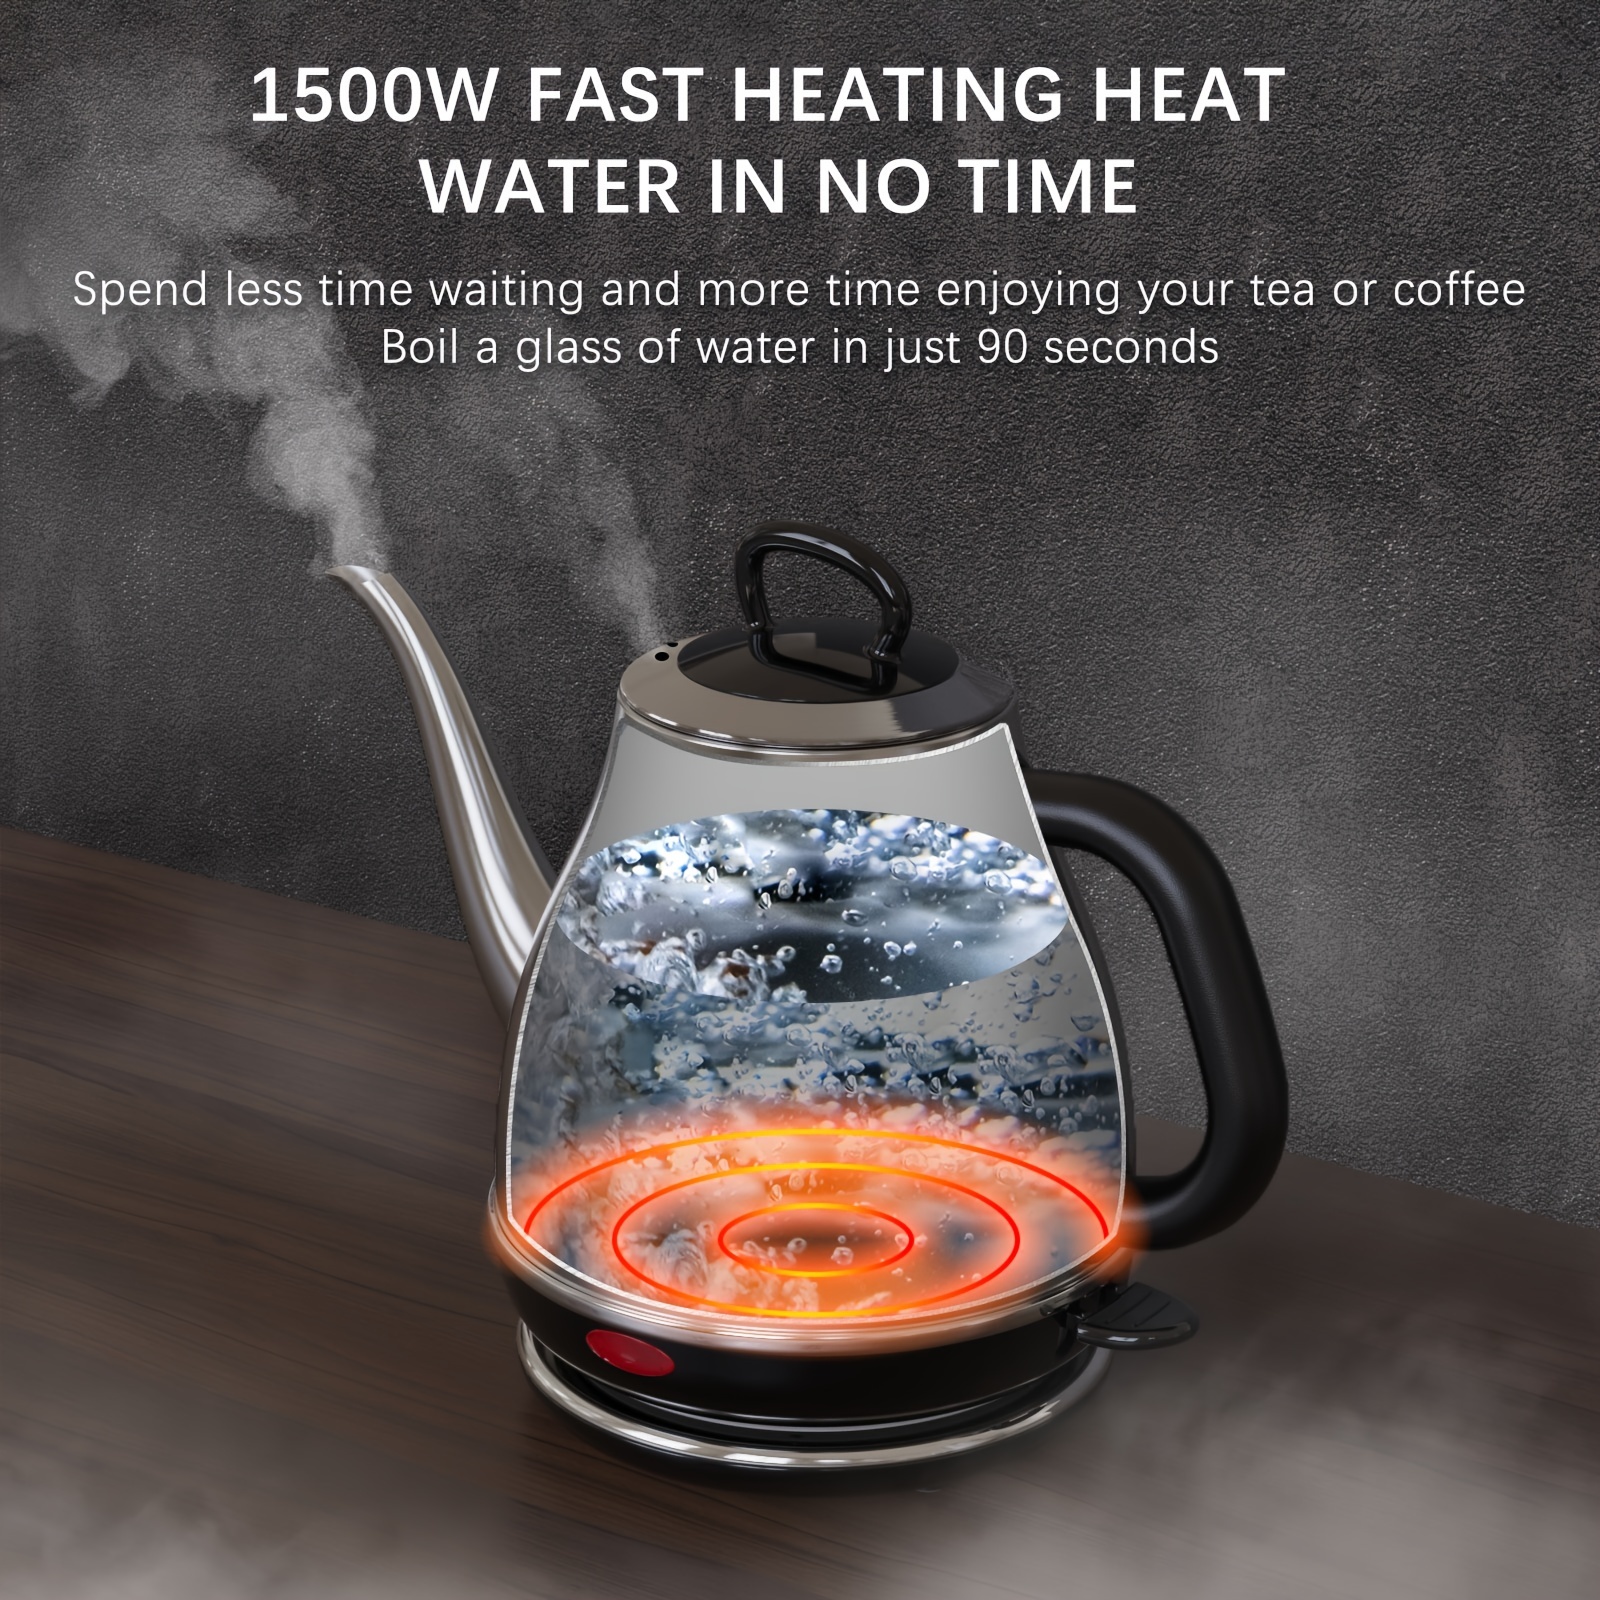 Best instant hot water kettle for when hot water can't wait